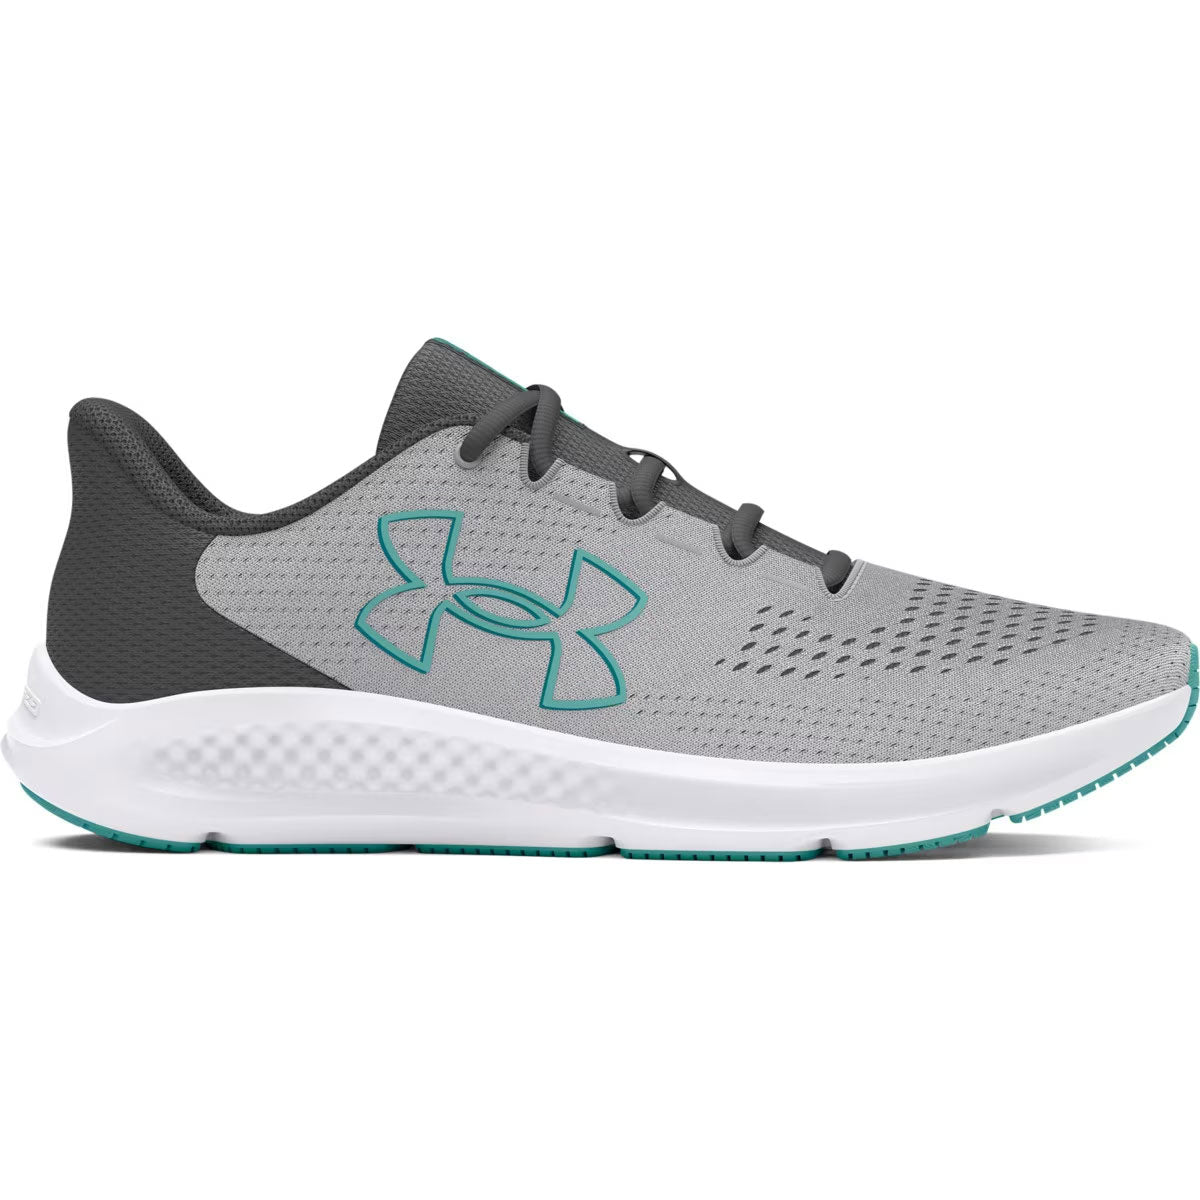 Under Armour Charged Pursuit 3 BL Running Shoes - Womens - Mod Grey/Castlerock/Radial Turquoise